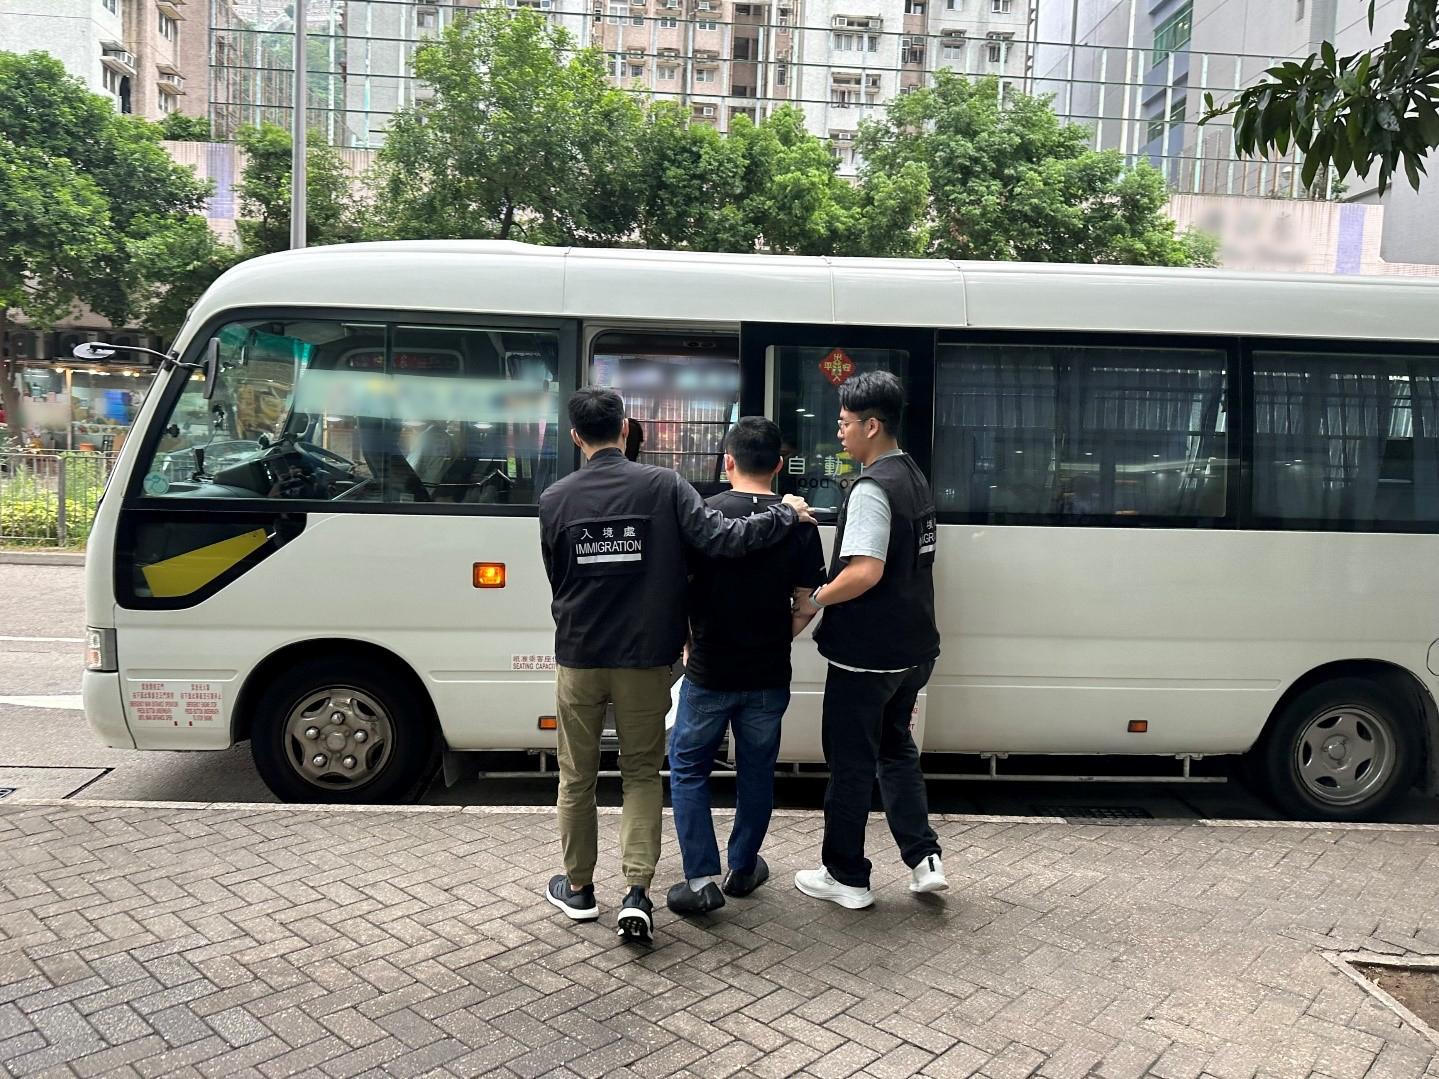 The Immigration Department mounted a series of territory-wide anti-illegal worker operations codenamed "Greenlane", "Twilight" and a joint operation with the Hong Kong Police Force codenamed "Windsand" for three consecutive days from November 7 to yesterday (November 9). Photo shows a suspected illegal worker arrested during an operation.